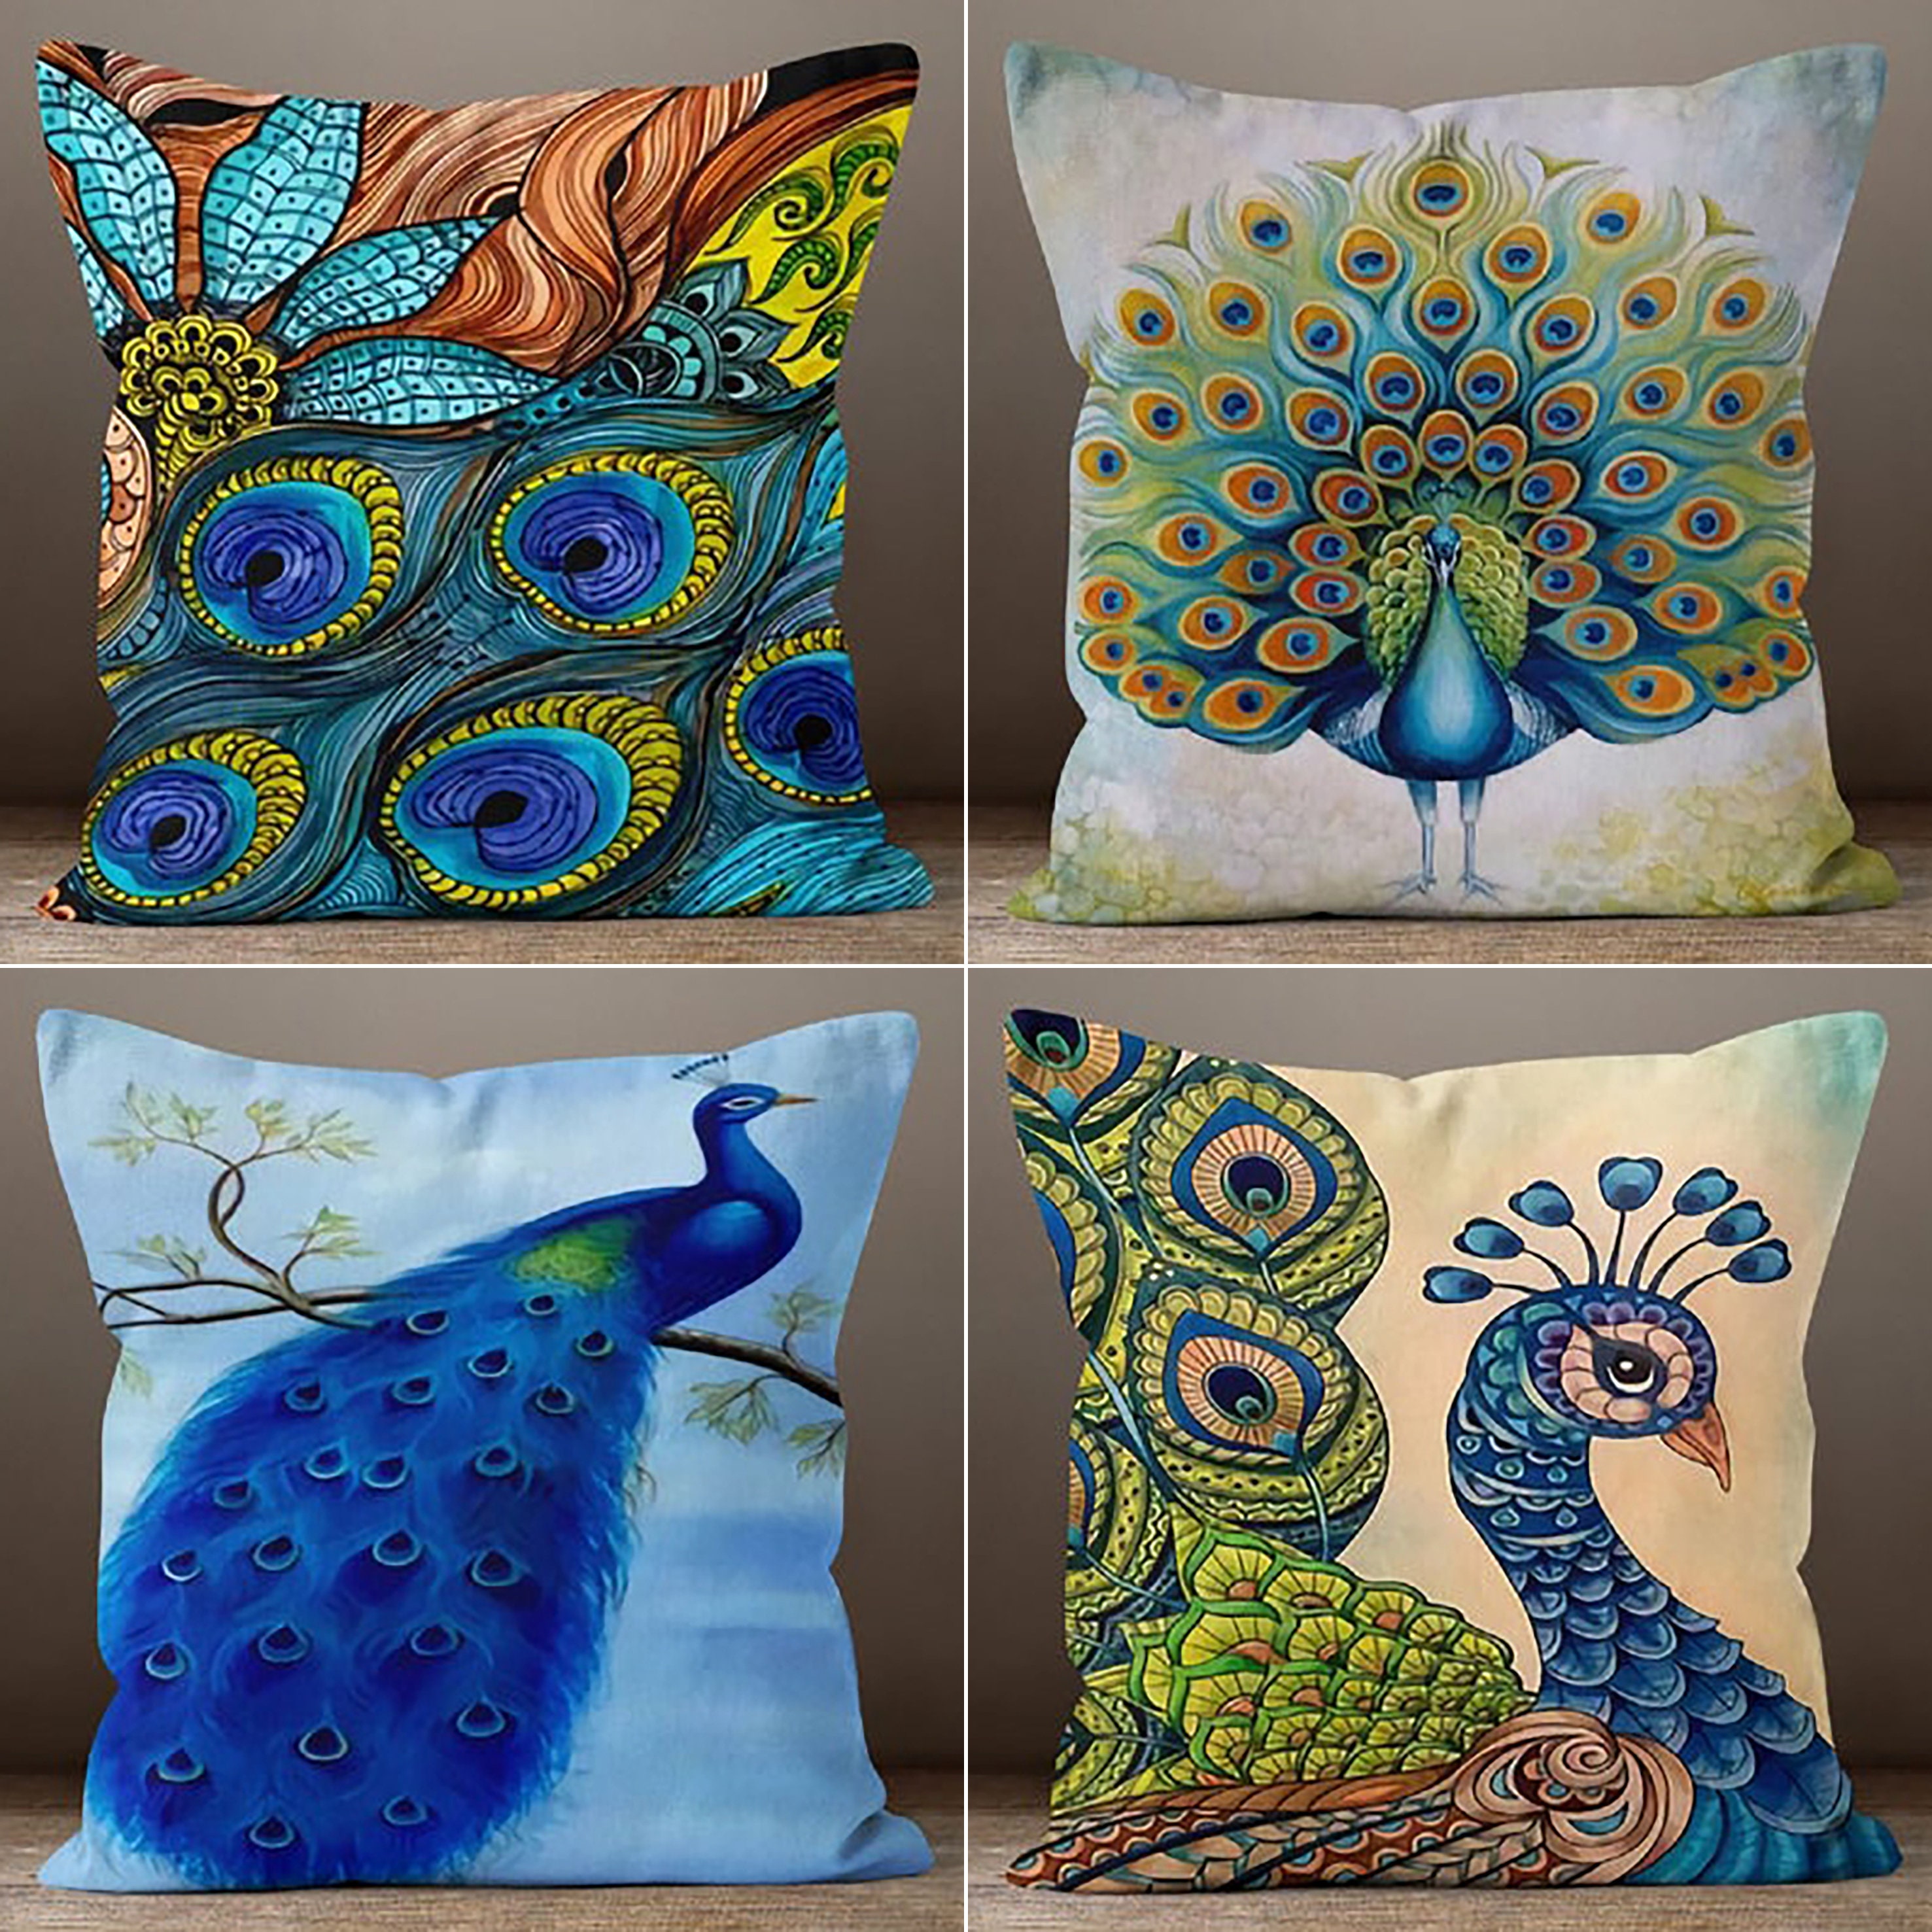 Peacock Pillow Covers, Cushion Cover, Gift Ideas, Housewarming Gift,  Outdoor Pillow Covers, Peacock Throw Pillow, Animal Print Home Decor 